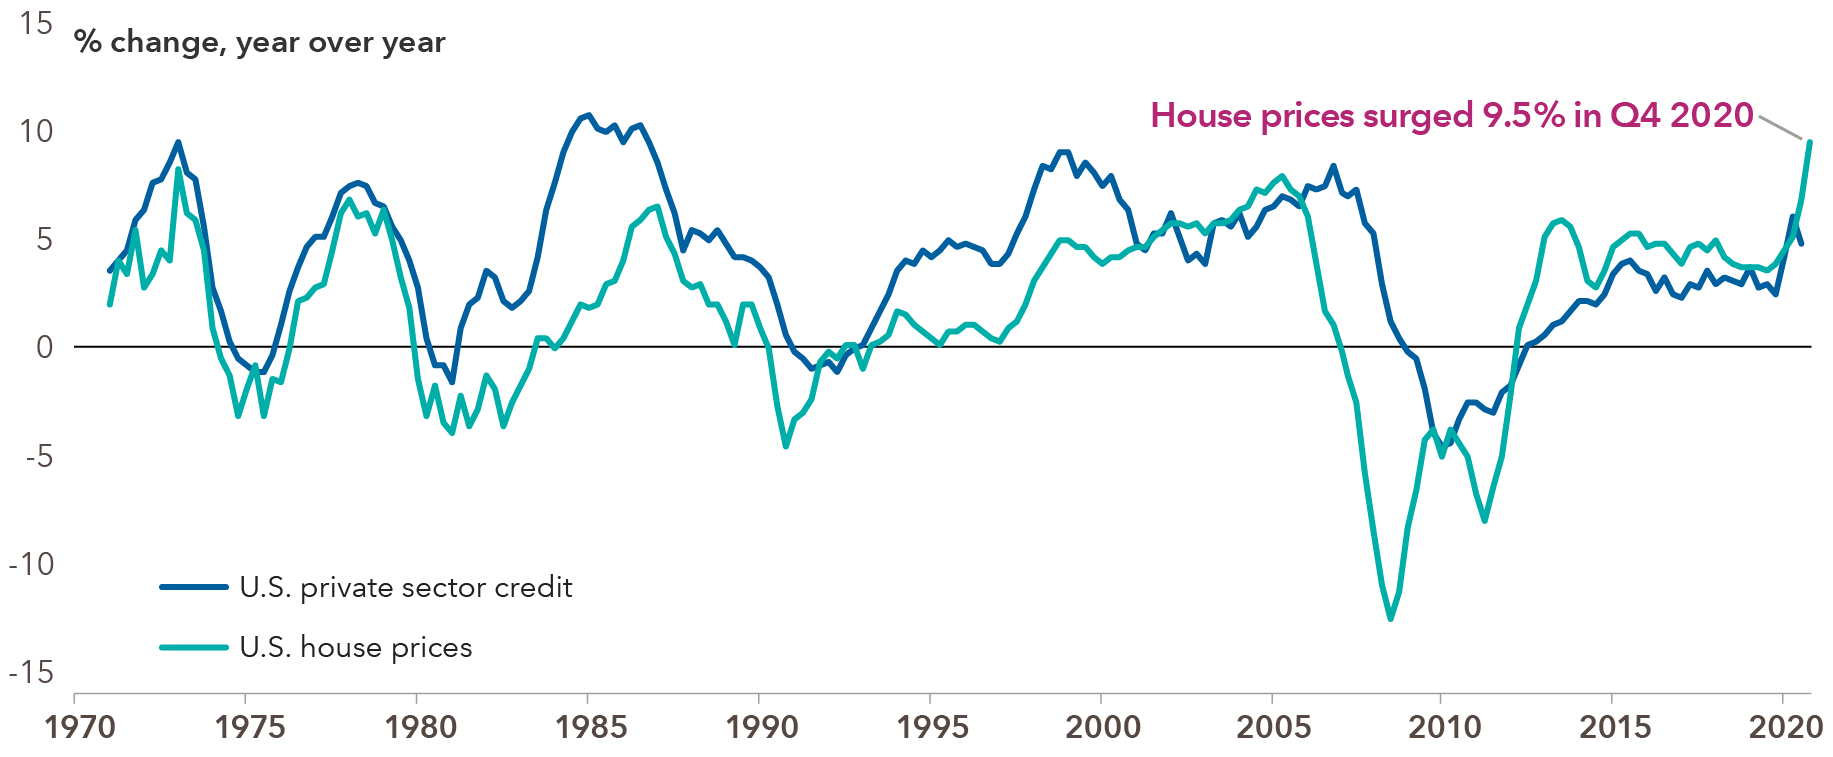 Line chart shows the year-over-year percentage change in U.S. house prices and U.S. private sector credit from 1970 through 2020. The two generally move in tandem. House prices surged 9.5% in the fourth quarter of 2020. Private credit dipped slightly in the third quarter of 2020. Both measures were up sharply from a year earlier.